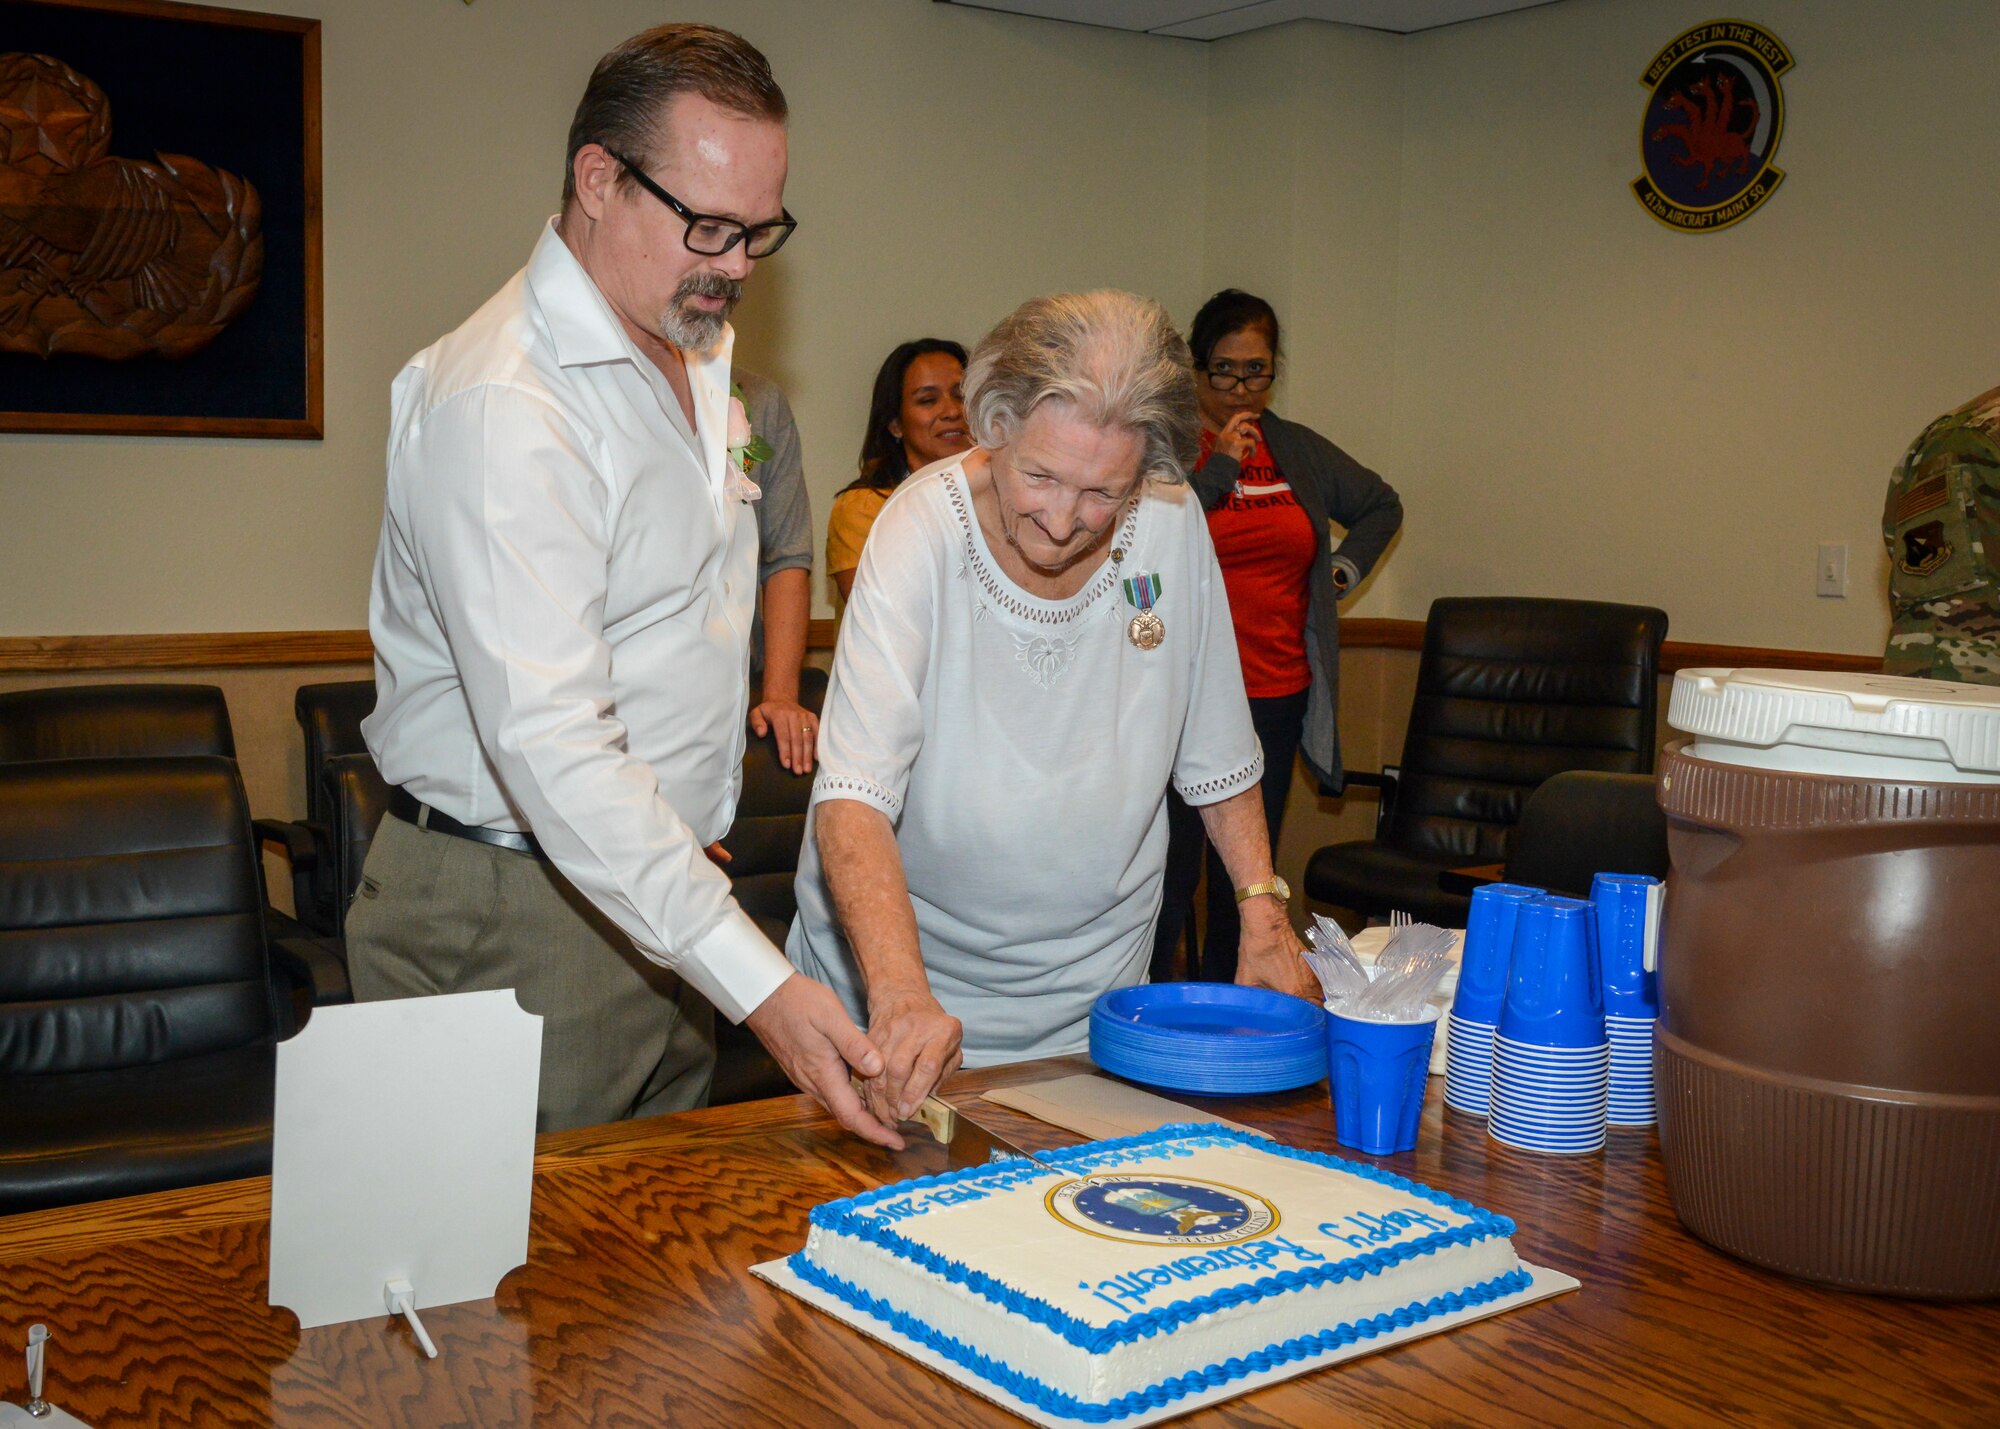 Patricia Henrich cuts a cake celebrating her retirement after 67 years of federal civilian service following her retirement ceremony at Edwards Air Force Base, Calif., May 31. (U.S. Air Force photo by Giancarlo Casem)